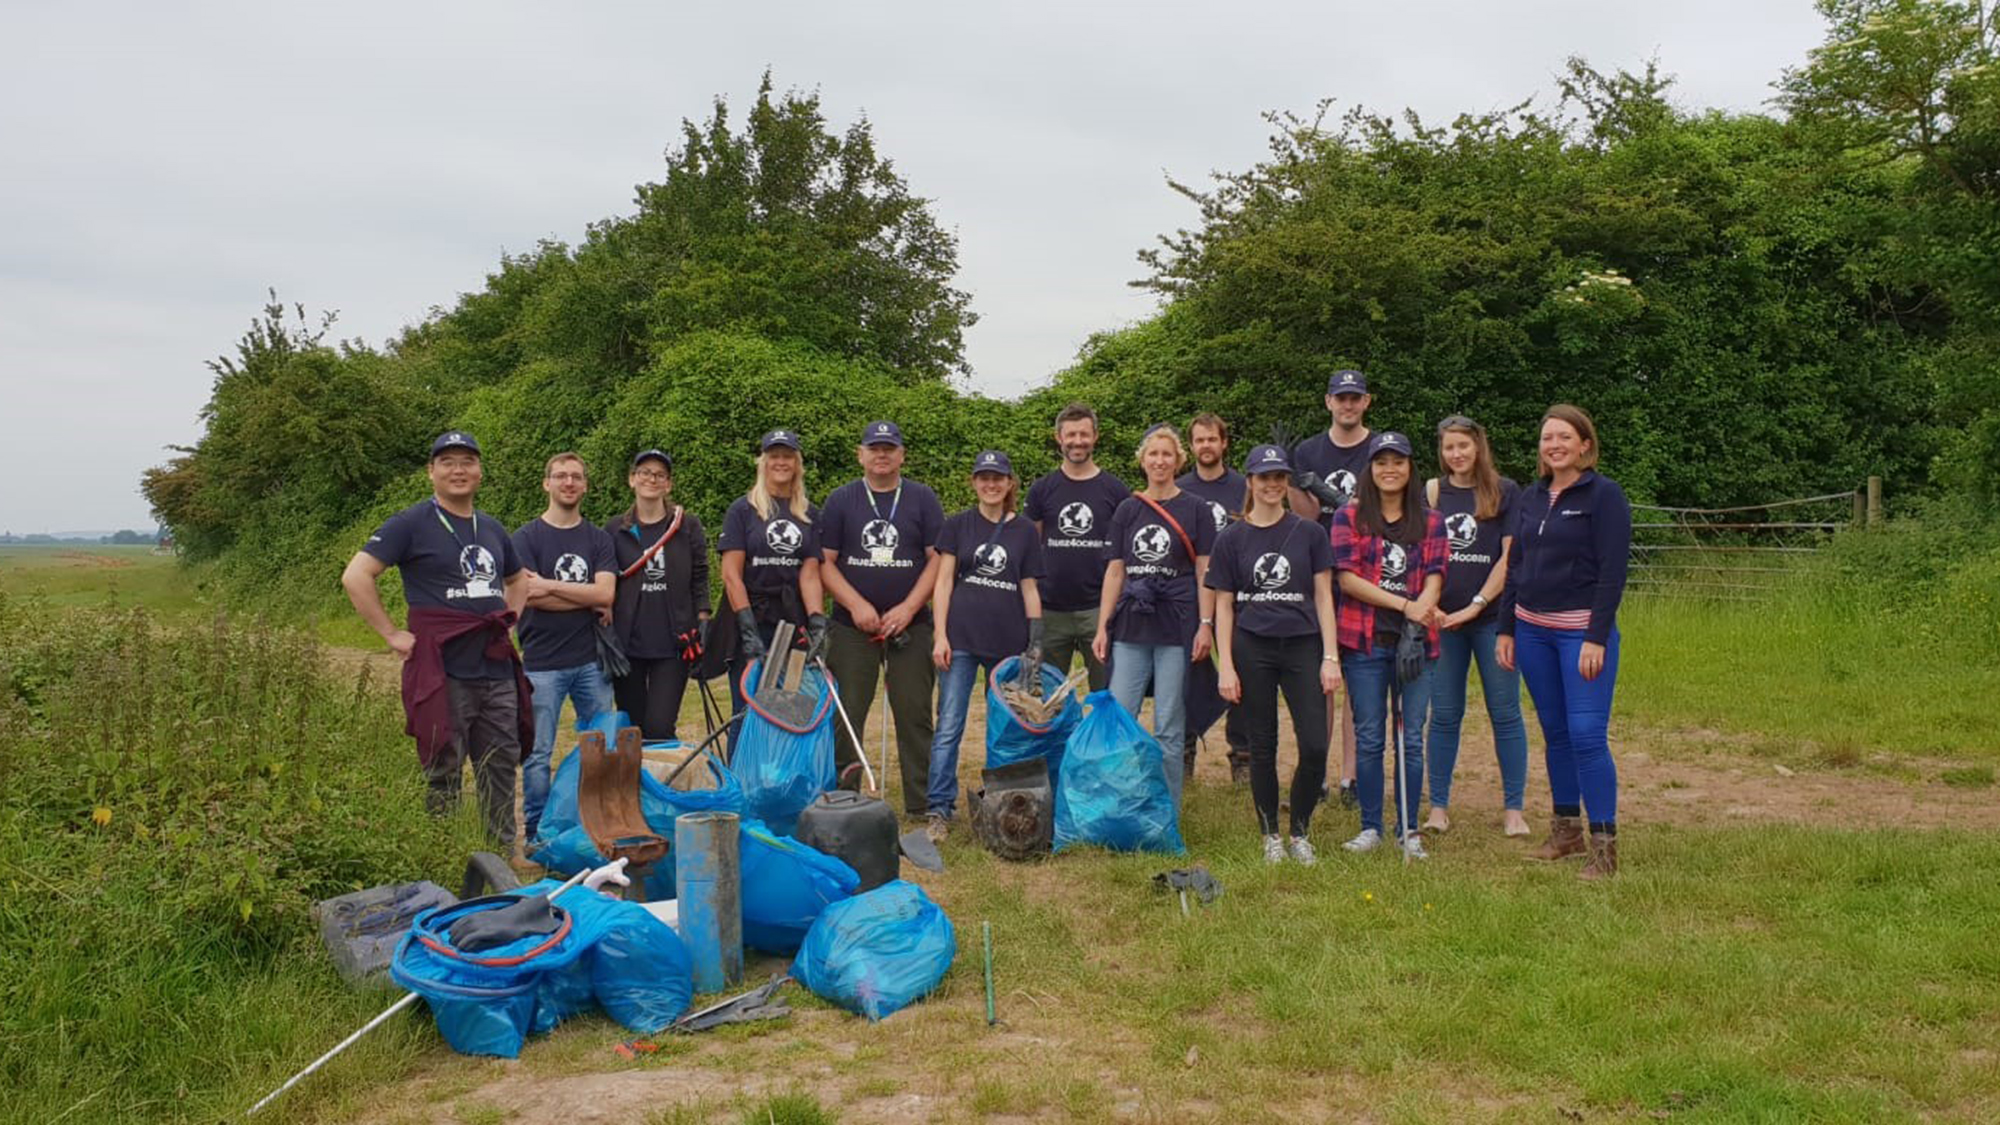 SUEZ employees in the UK join forces to collect waste along the Severn estuary for World Oceans Day